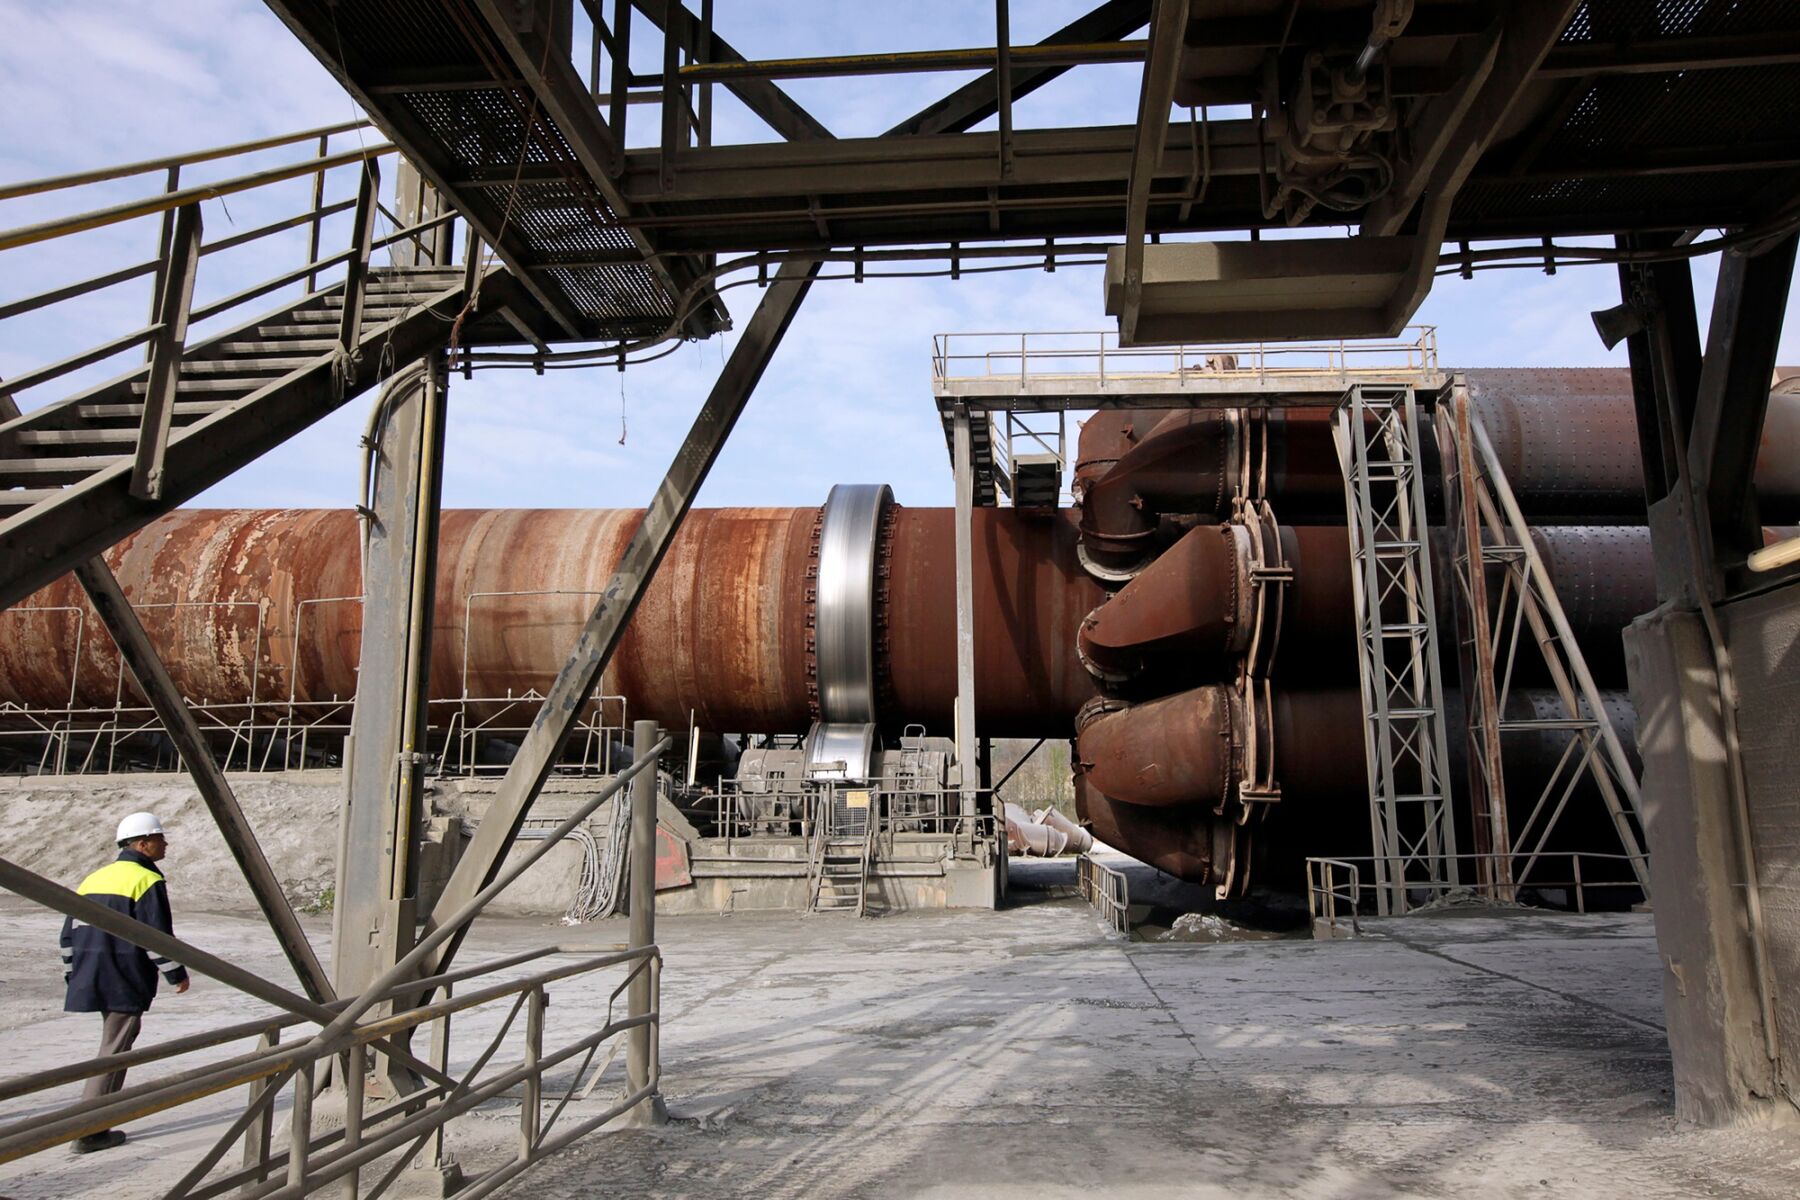 The kiln at ENCI cement factory, part of the Heidelberg group, Maastricht, Netherlands.(AP Photo/Peter Dejong)